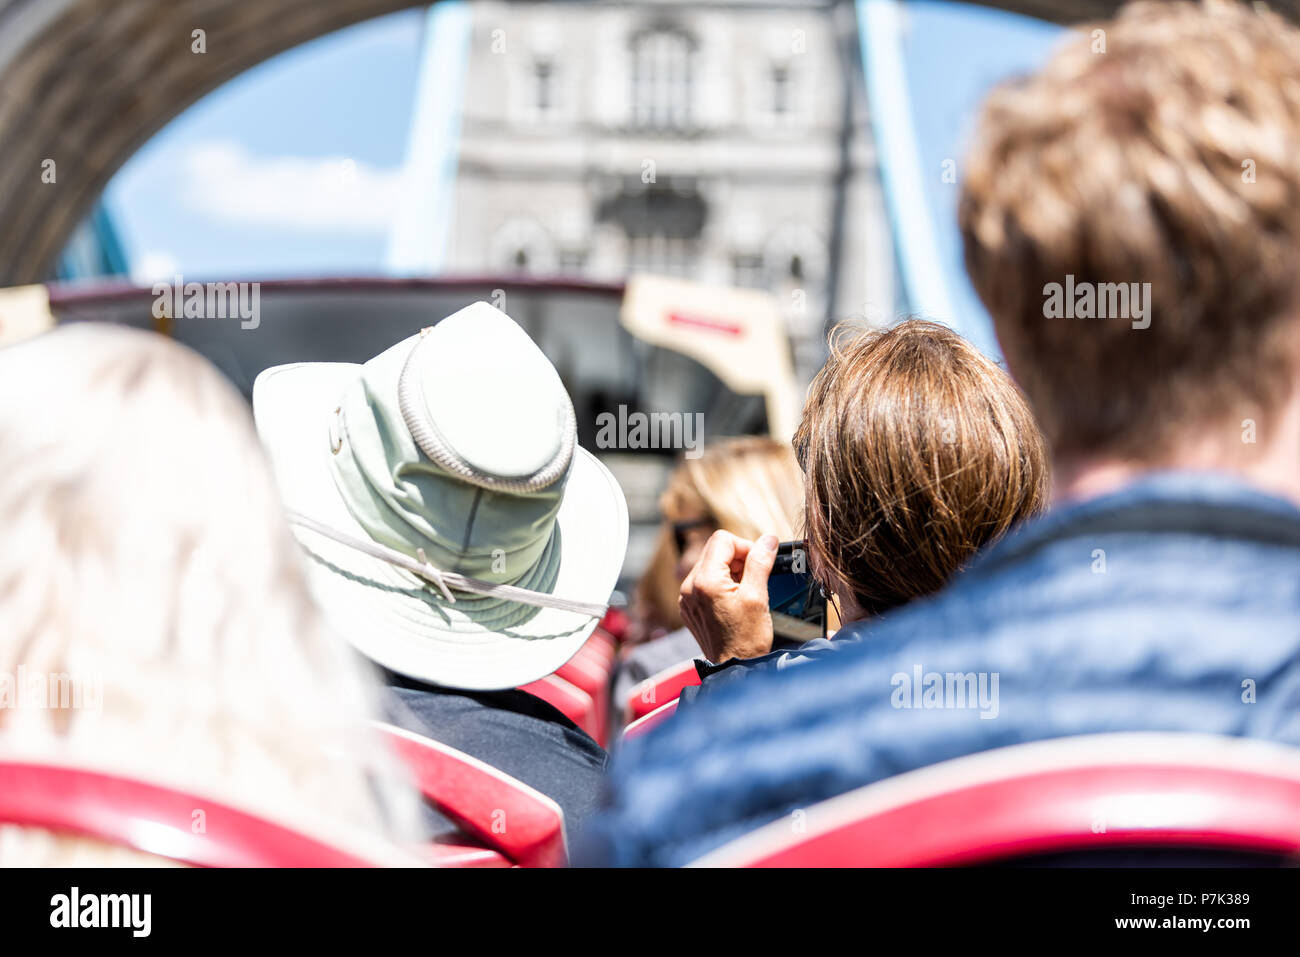 London, UK - June 22, 2018: Back of people tourists sitting in seats, looking at view of city tower bridge on street road double decker red big bus in Stock Photo